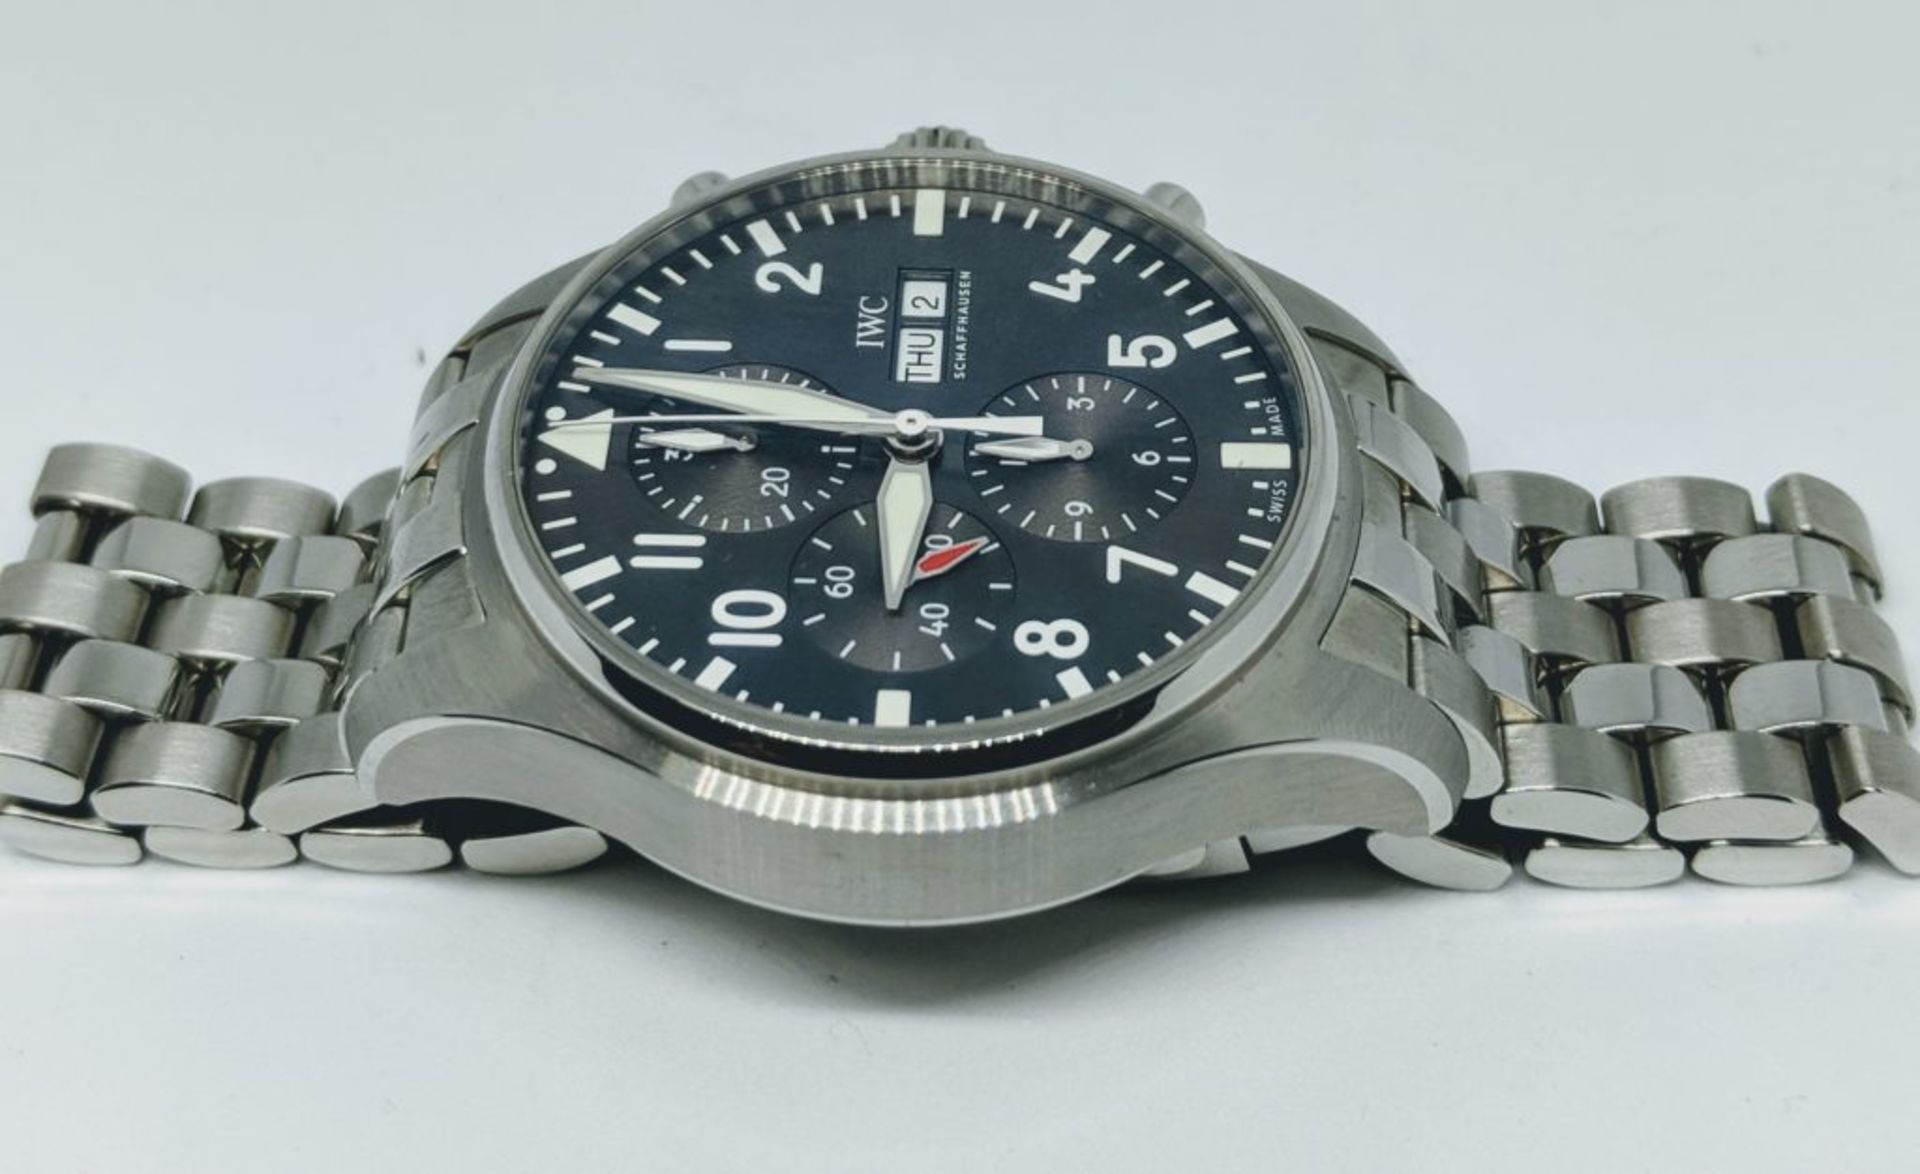 IWC – Pilot’s Watch Chronograph Spitfire - Image 3 of 4